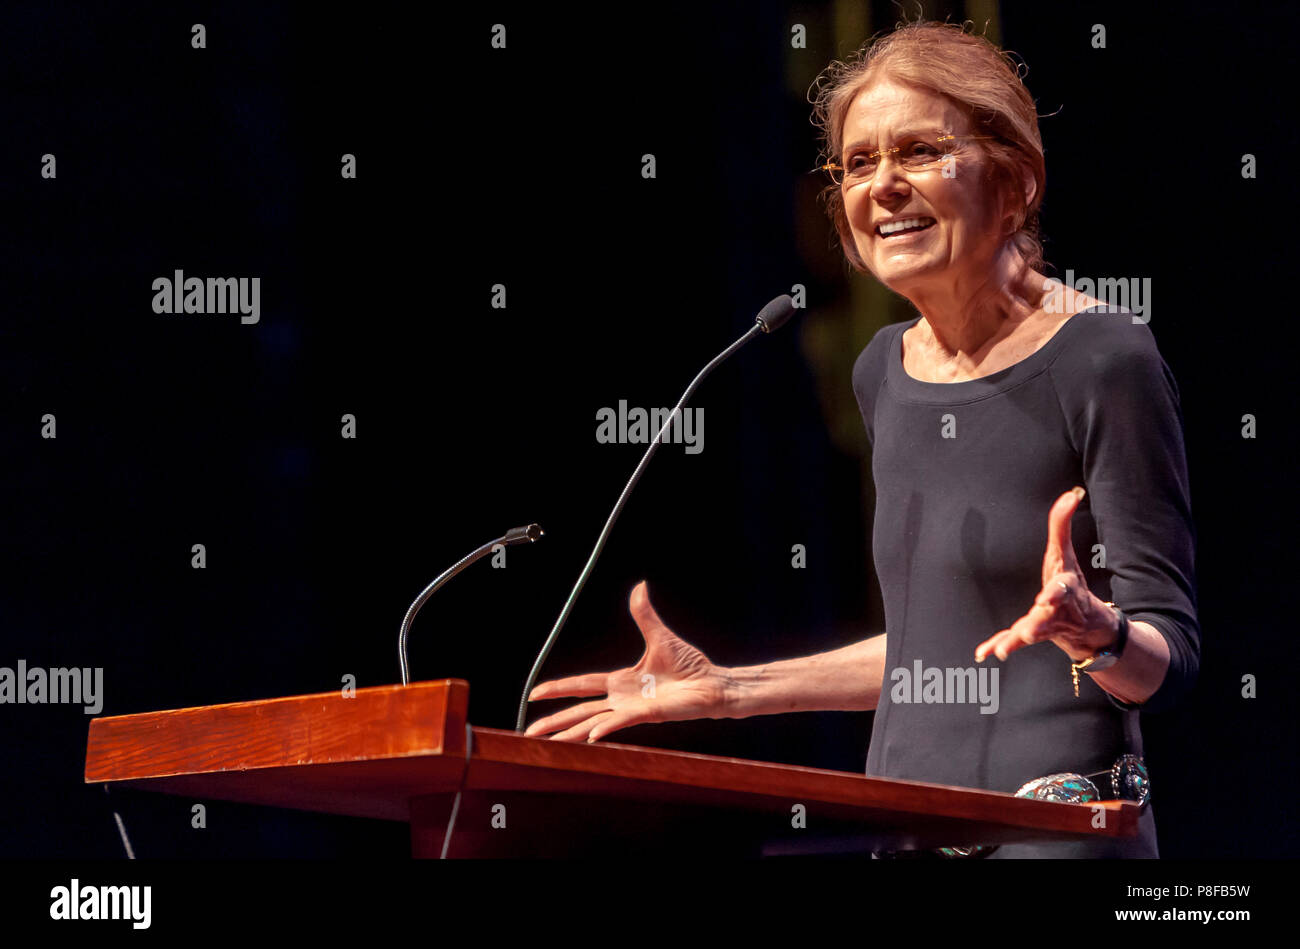 Gloria Steinem stands at a podium giving a lecture. Stock Photo